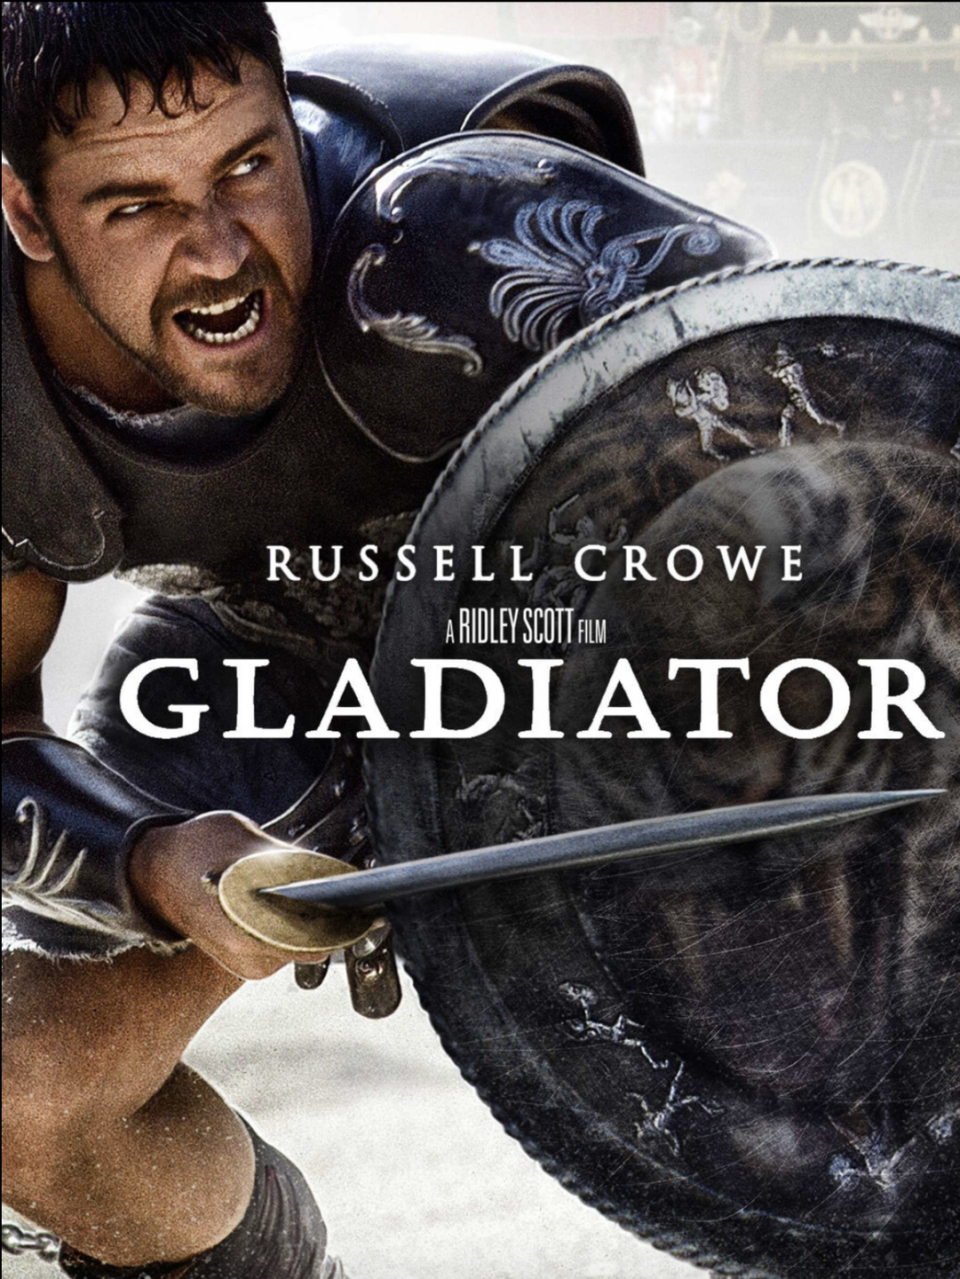 <p>When Roman General Maximus (Russell Crowe) is betrayed by the corrupt son of the emperor (<a href="https://www.goodhousekeeping.com/life/entertainment/a30769509/joaquin-phoenix-rooney-mara-relationship-story/" rel="nofollow noopener" target="_blank" data-ylk="slk:Joaquin Phoenix" class="link ">Joaquin Phoenix</a>), he becomes a gladiator and fights through the ranks to ultimately avenge the murders of his family. This action-packed film, inspired loosely by real events that occurred within the Roman Empire back in the 2nd century, is full of epic fights and themes of love, dedication, perseverance and family loyalty. </p><p><a class="link " href="https://www.amazon.com/Gladiator-Russell-Crowe/dp/B0094K1IPI?tag=syn-yahoo-20&ascsubtag=%5Bartid%7C10055.g.40299603%5Bsrc%7Cyahoo-us" rel="nofollow noopener" target="_blank" data-ylk="slk:Amazon">Amazon</a></p><p><a class="link " href="https://go.redirectingat.com?id=74968X1596630&url=https%3A%2F%2Ftv.apple.com%2Fus%2Fmovie%2Fgladiator%2Fumc.cmc.50lk1pxm803ym8vizumxitxd2&sref=https%3A%2F%2Fwww.goodhousekeeping.com%2Flife%2Fentertainment%2Fg40299603%2Fbest-historical-movies%2F" rel="nofollow noopener" target="_blank" data-ylk="slk:Apple TV">Apple TV</a></p>